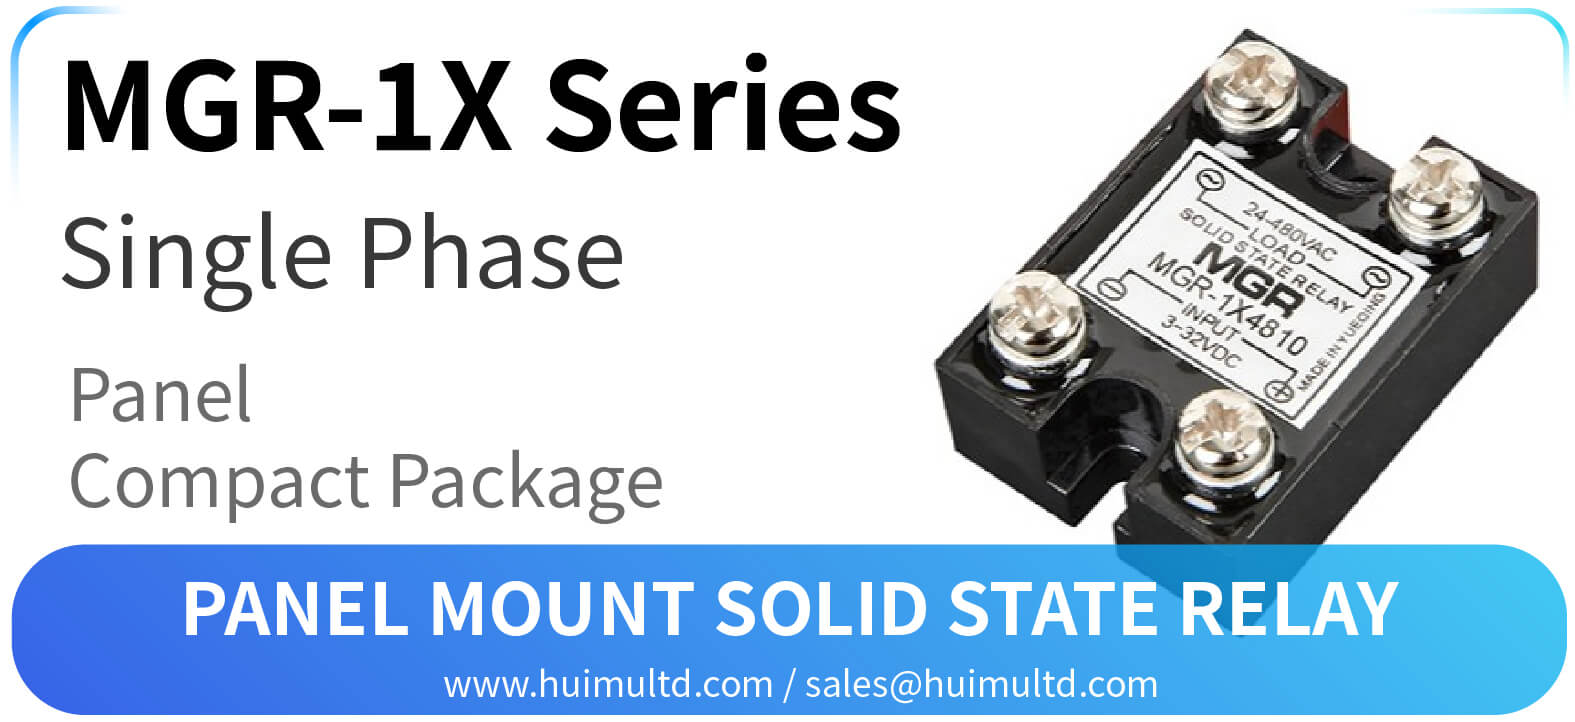 MGR-1X Series Panel Mount Solid State Relay